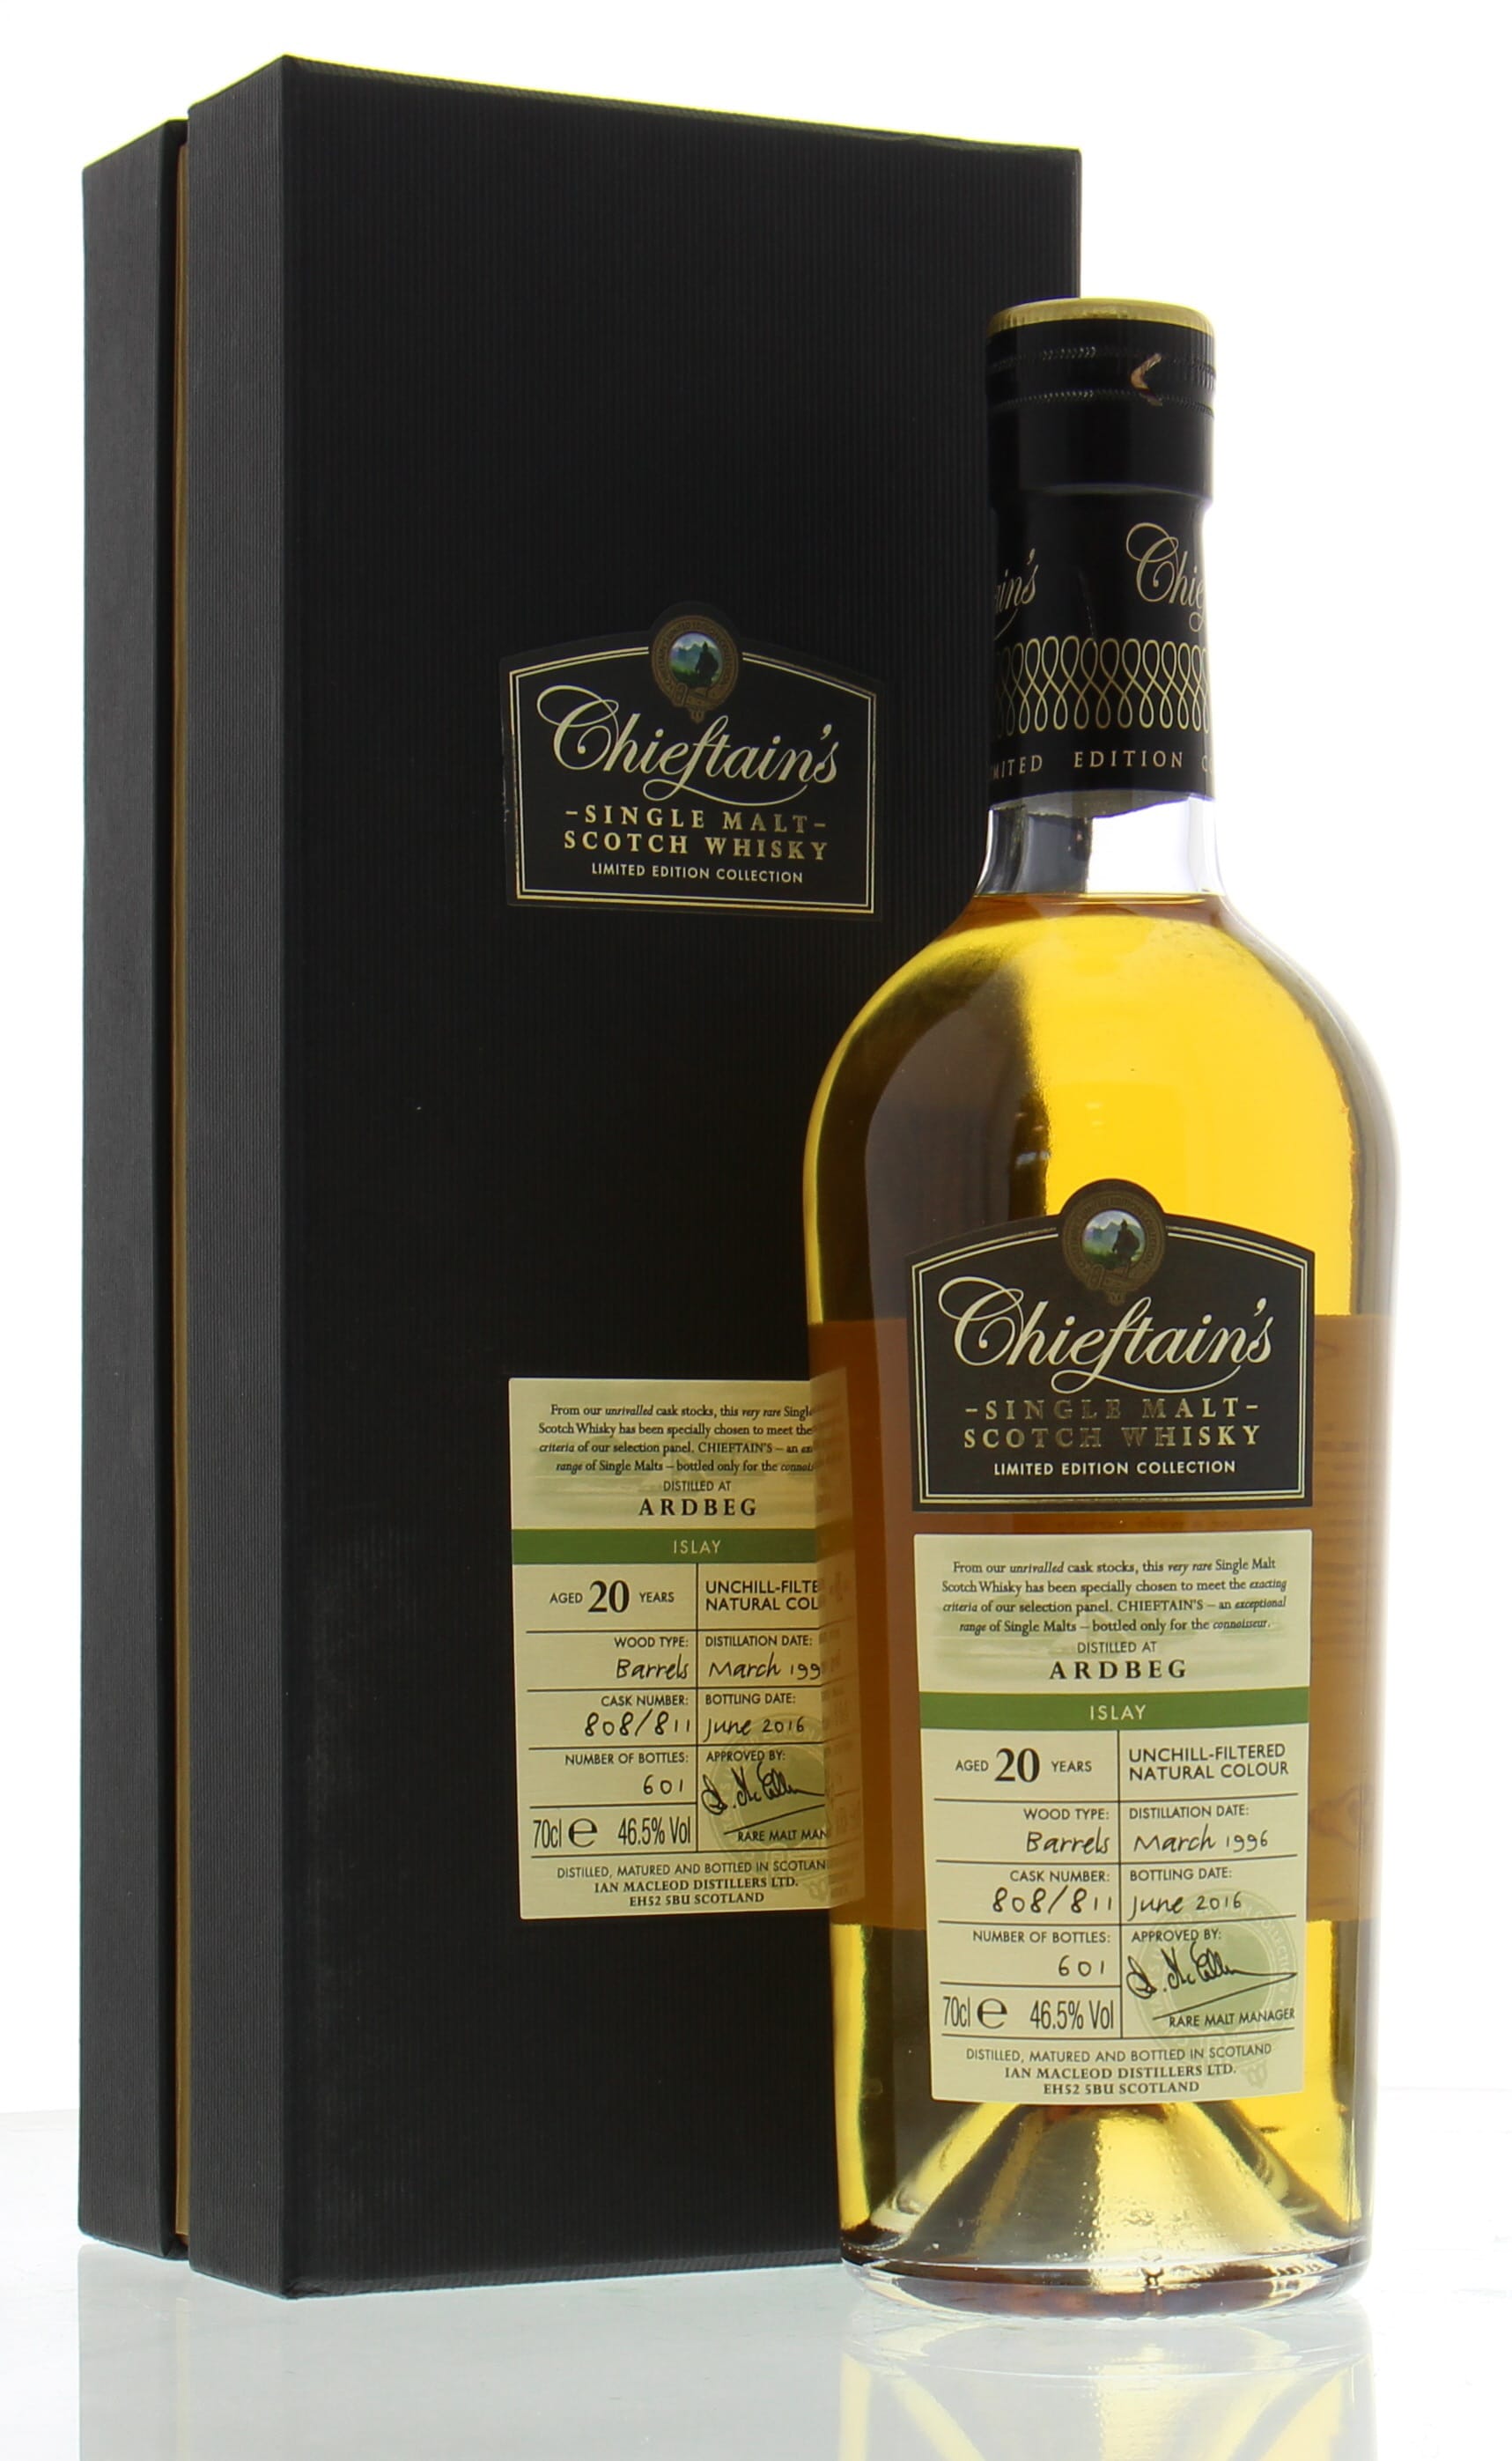 Ardbeg - 20 Years Old Chieftains Cask:808/811 46.5% 1996 In Original Container